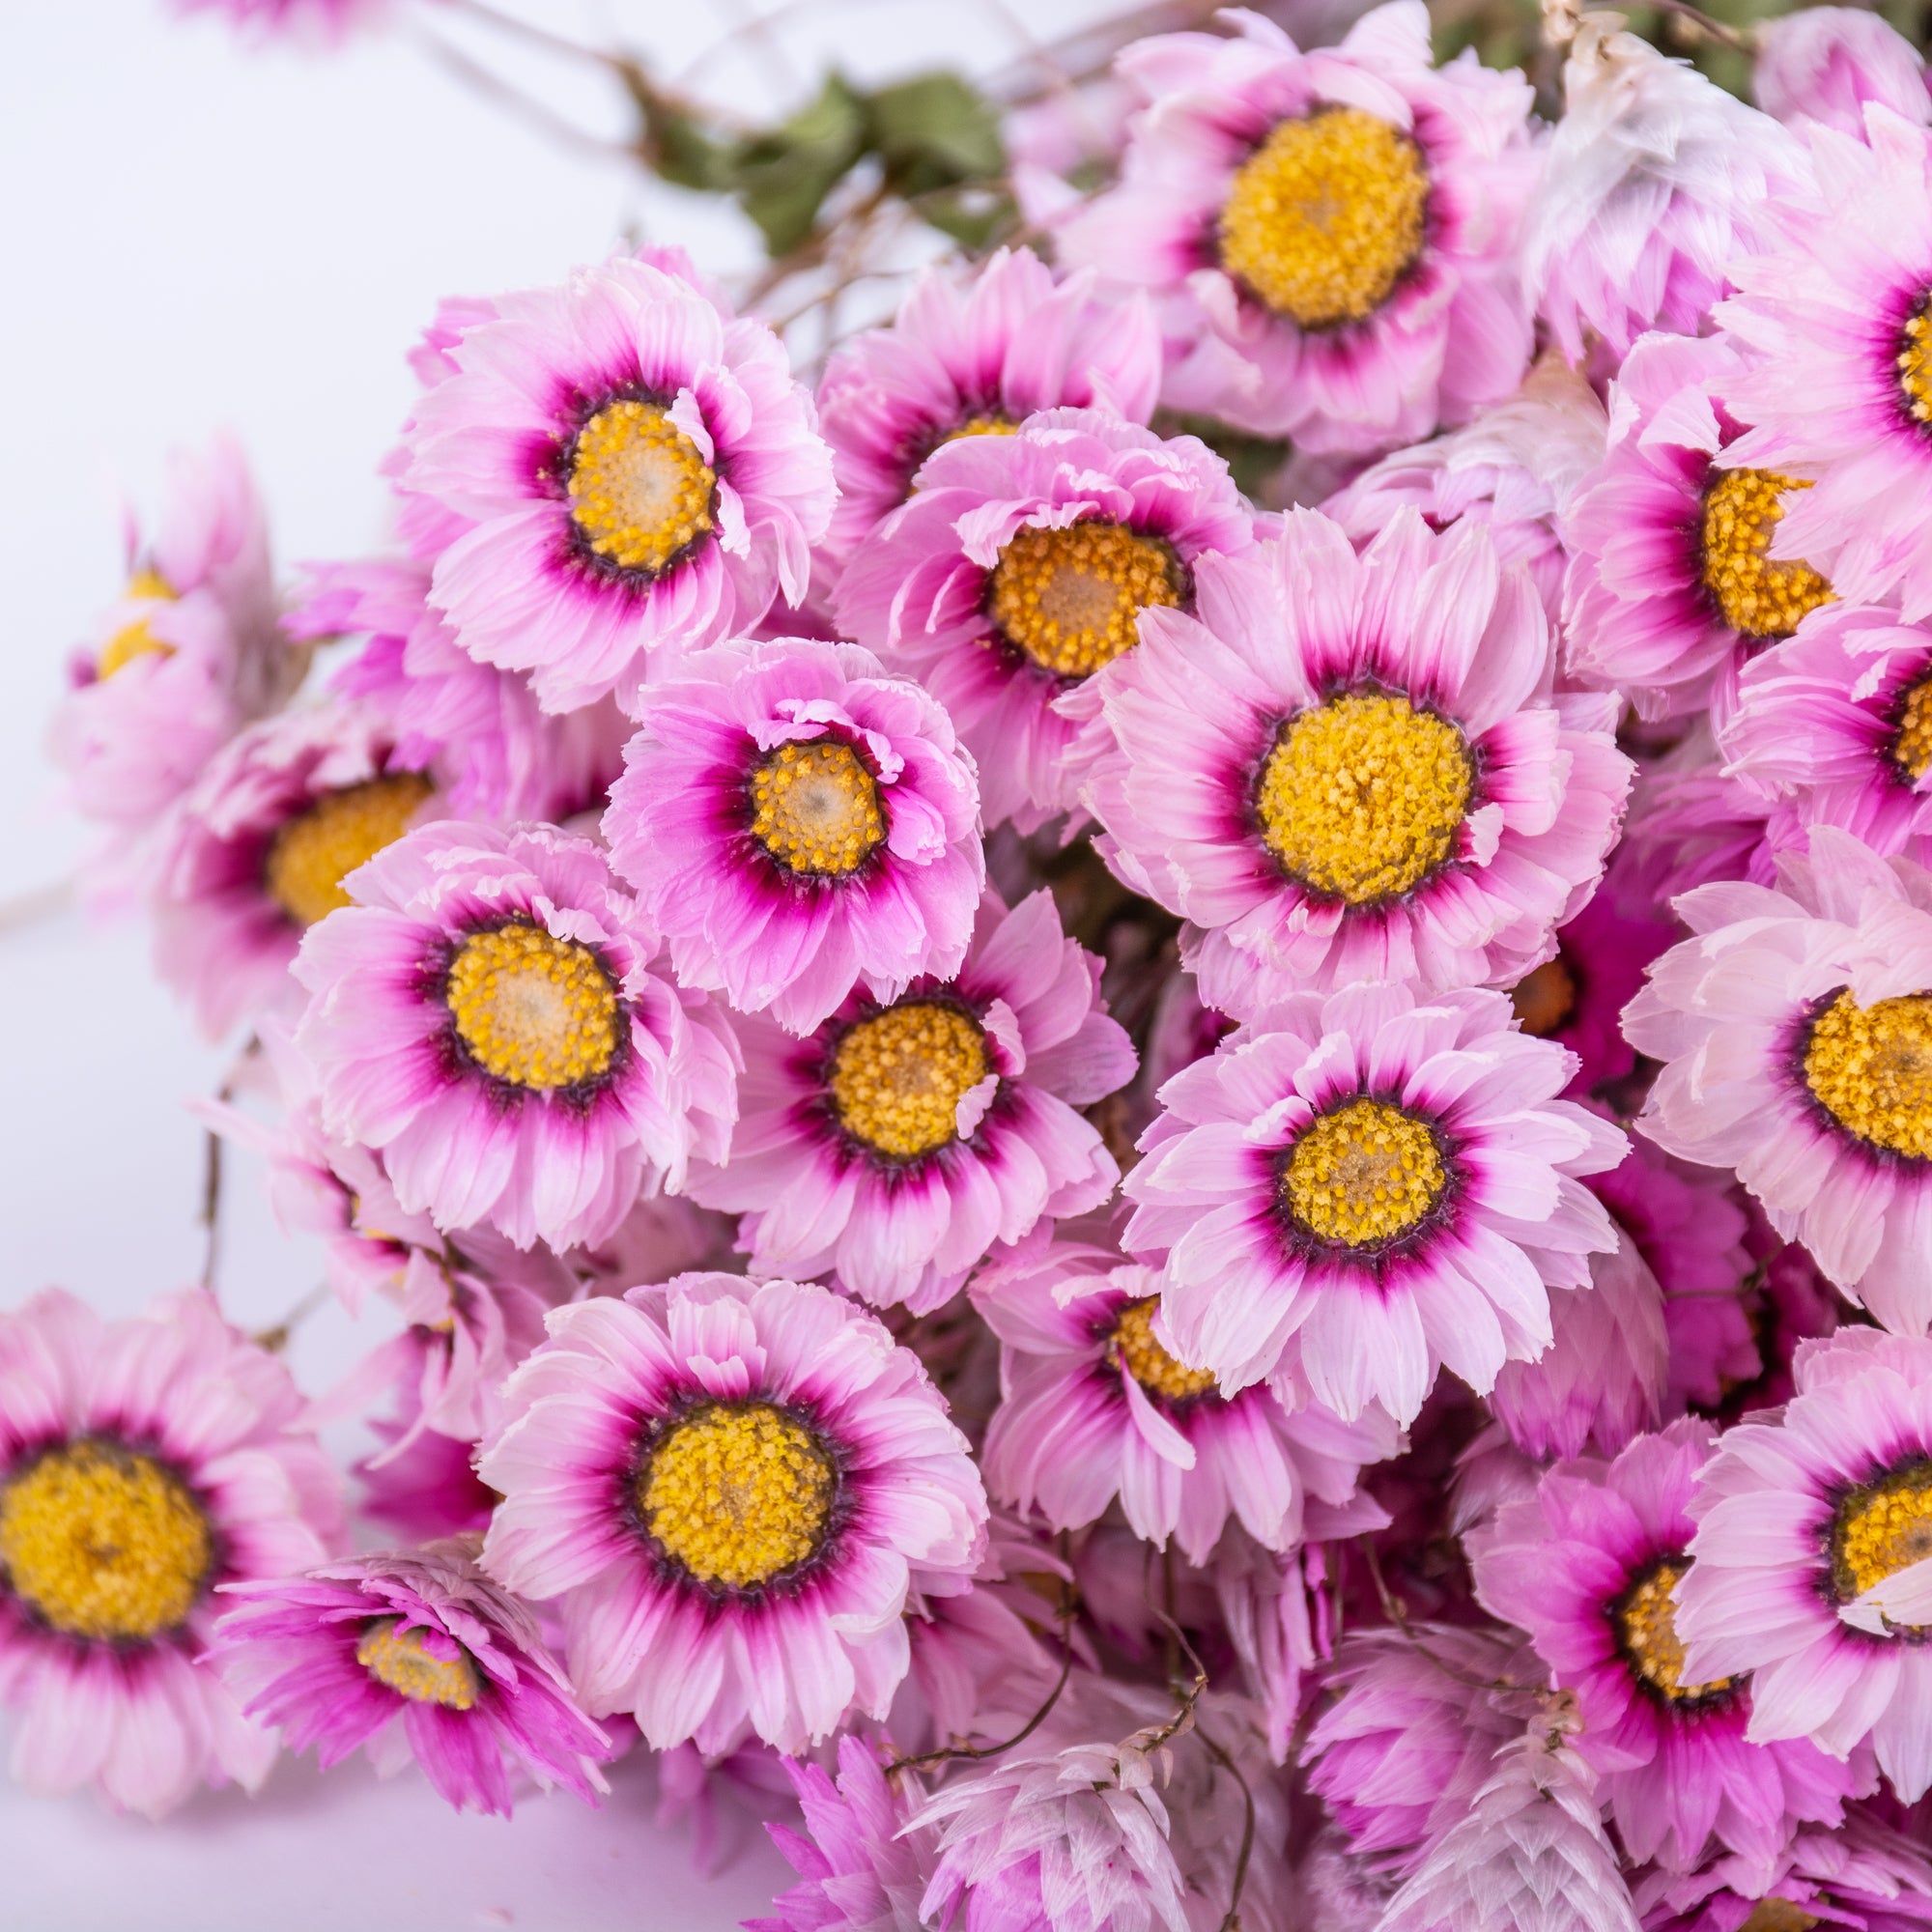 This image shows a bunch of pink Rodanthe flowers, laid on a white background.